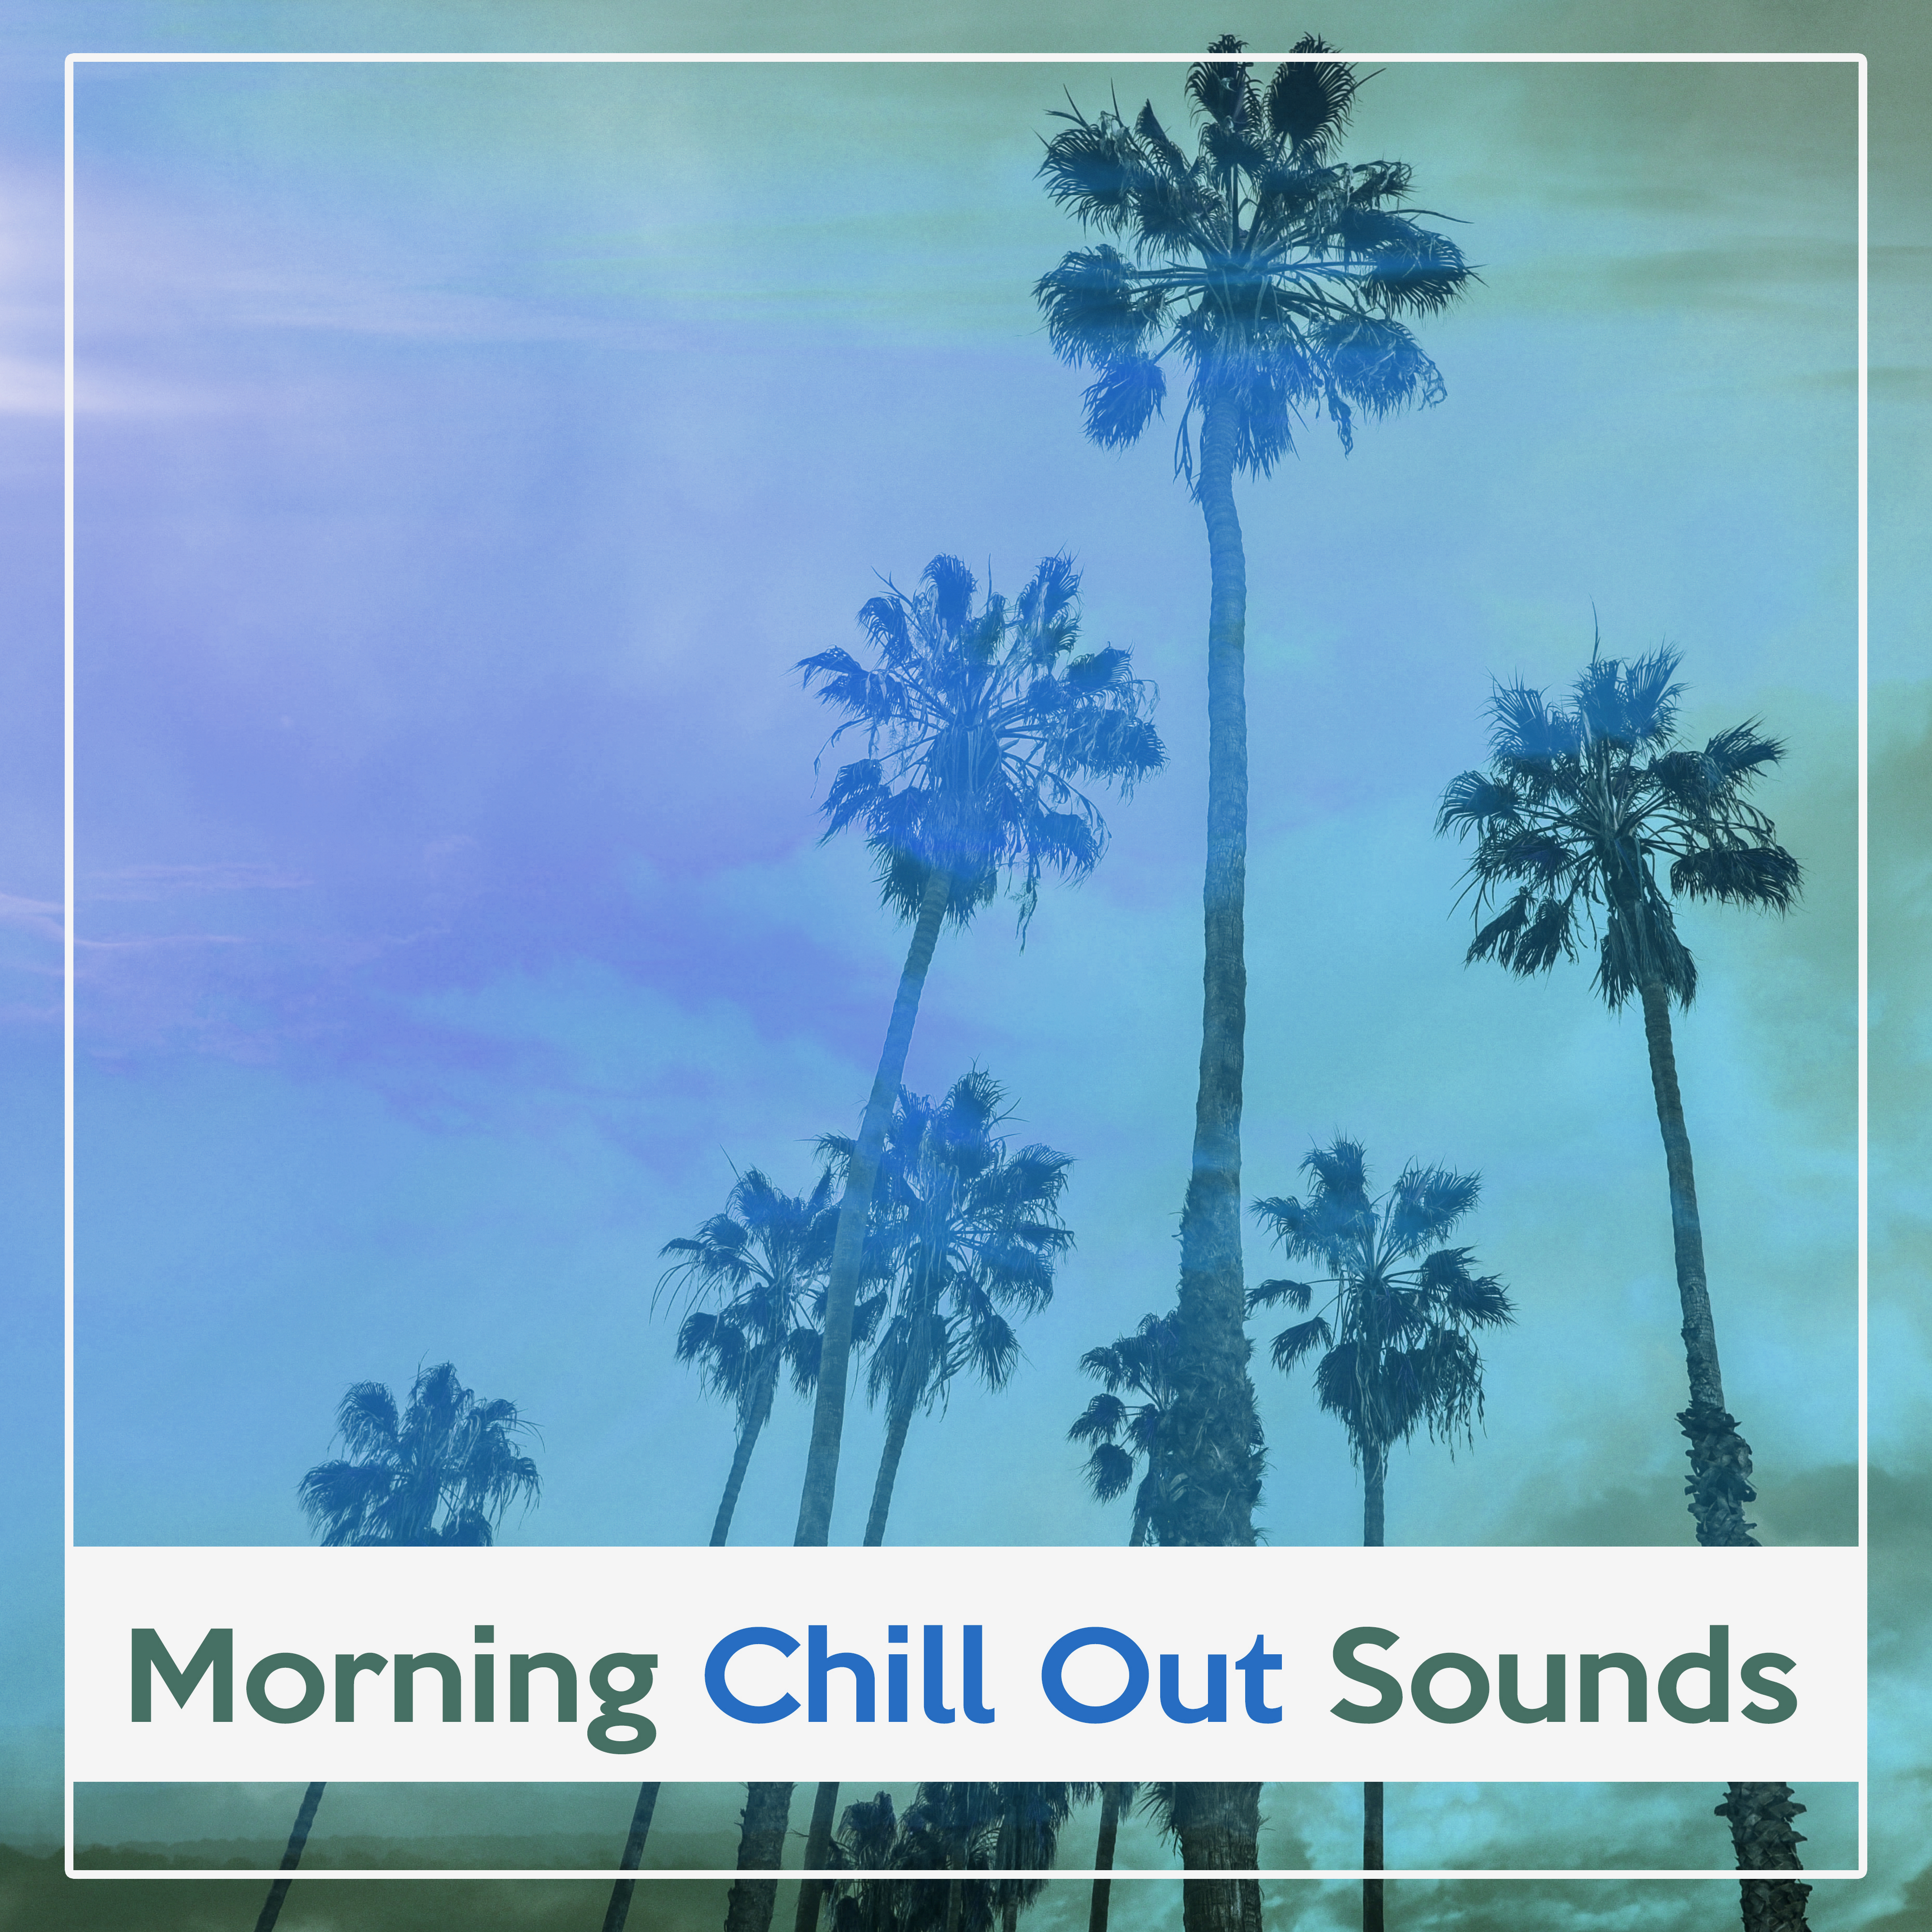 Morning Chill Out Sounds – Time to Wake Up, Cool Sounds, Stress Relief, Sunny Day